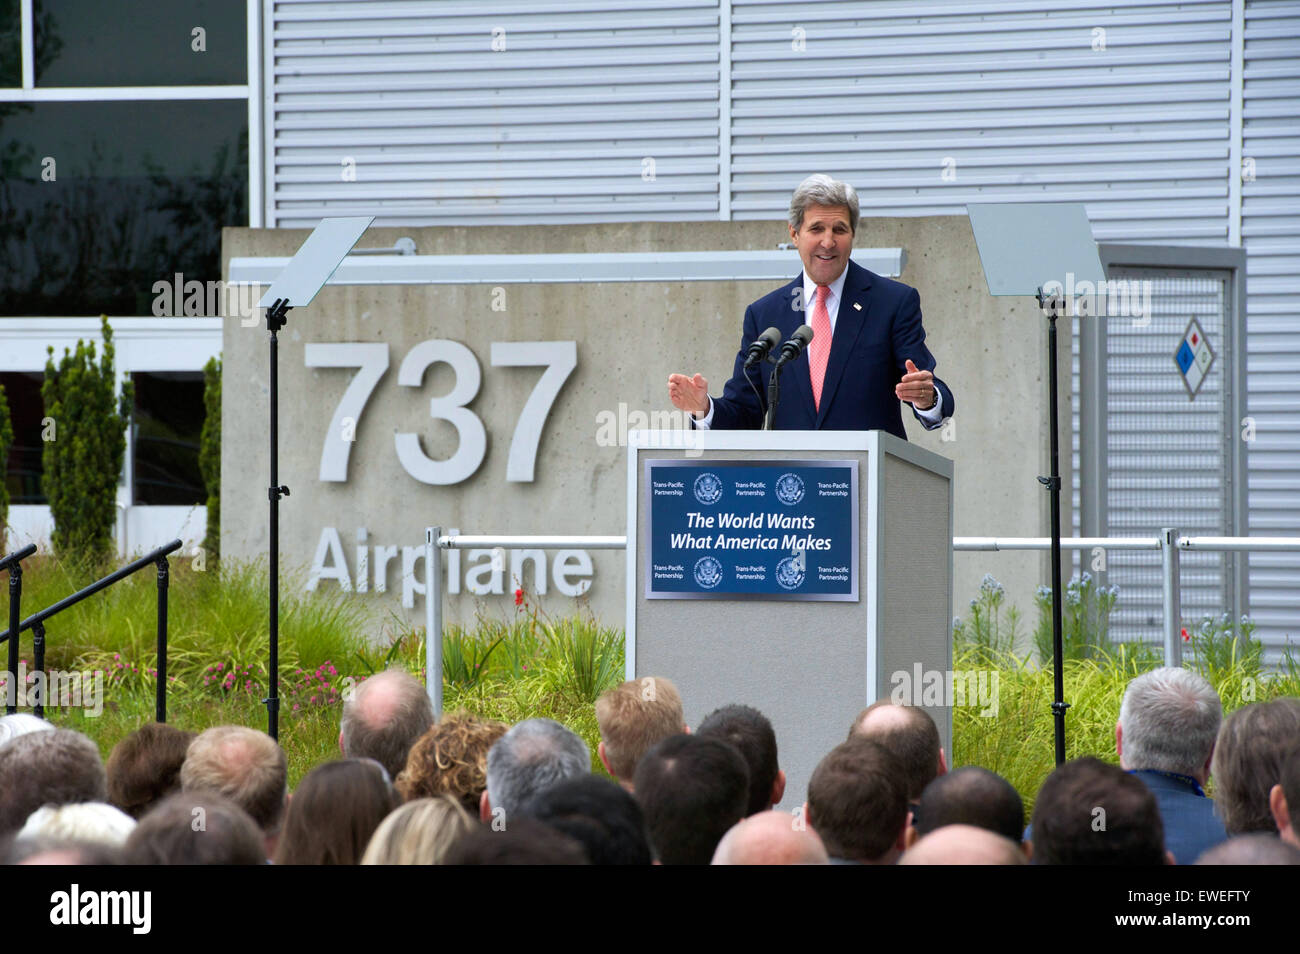 U.S. Secretary of State John Kerry delivers a speech focused on U.S. and Pacific regional trade policy at the Boeing Co.'s 737 Airplane Factory in Renton, Washington, on May 19, 2015. Stock Photo